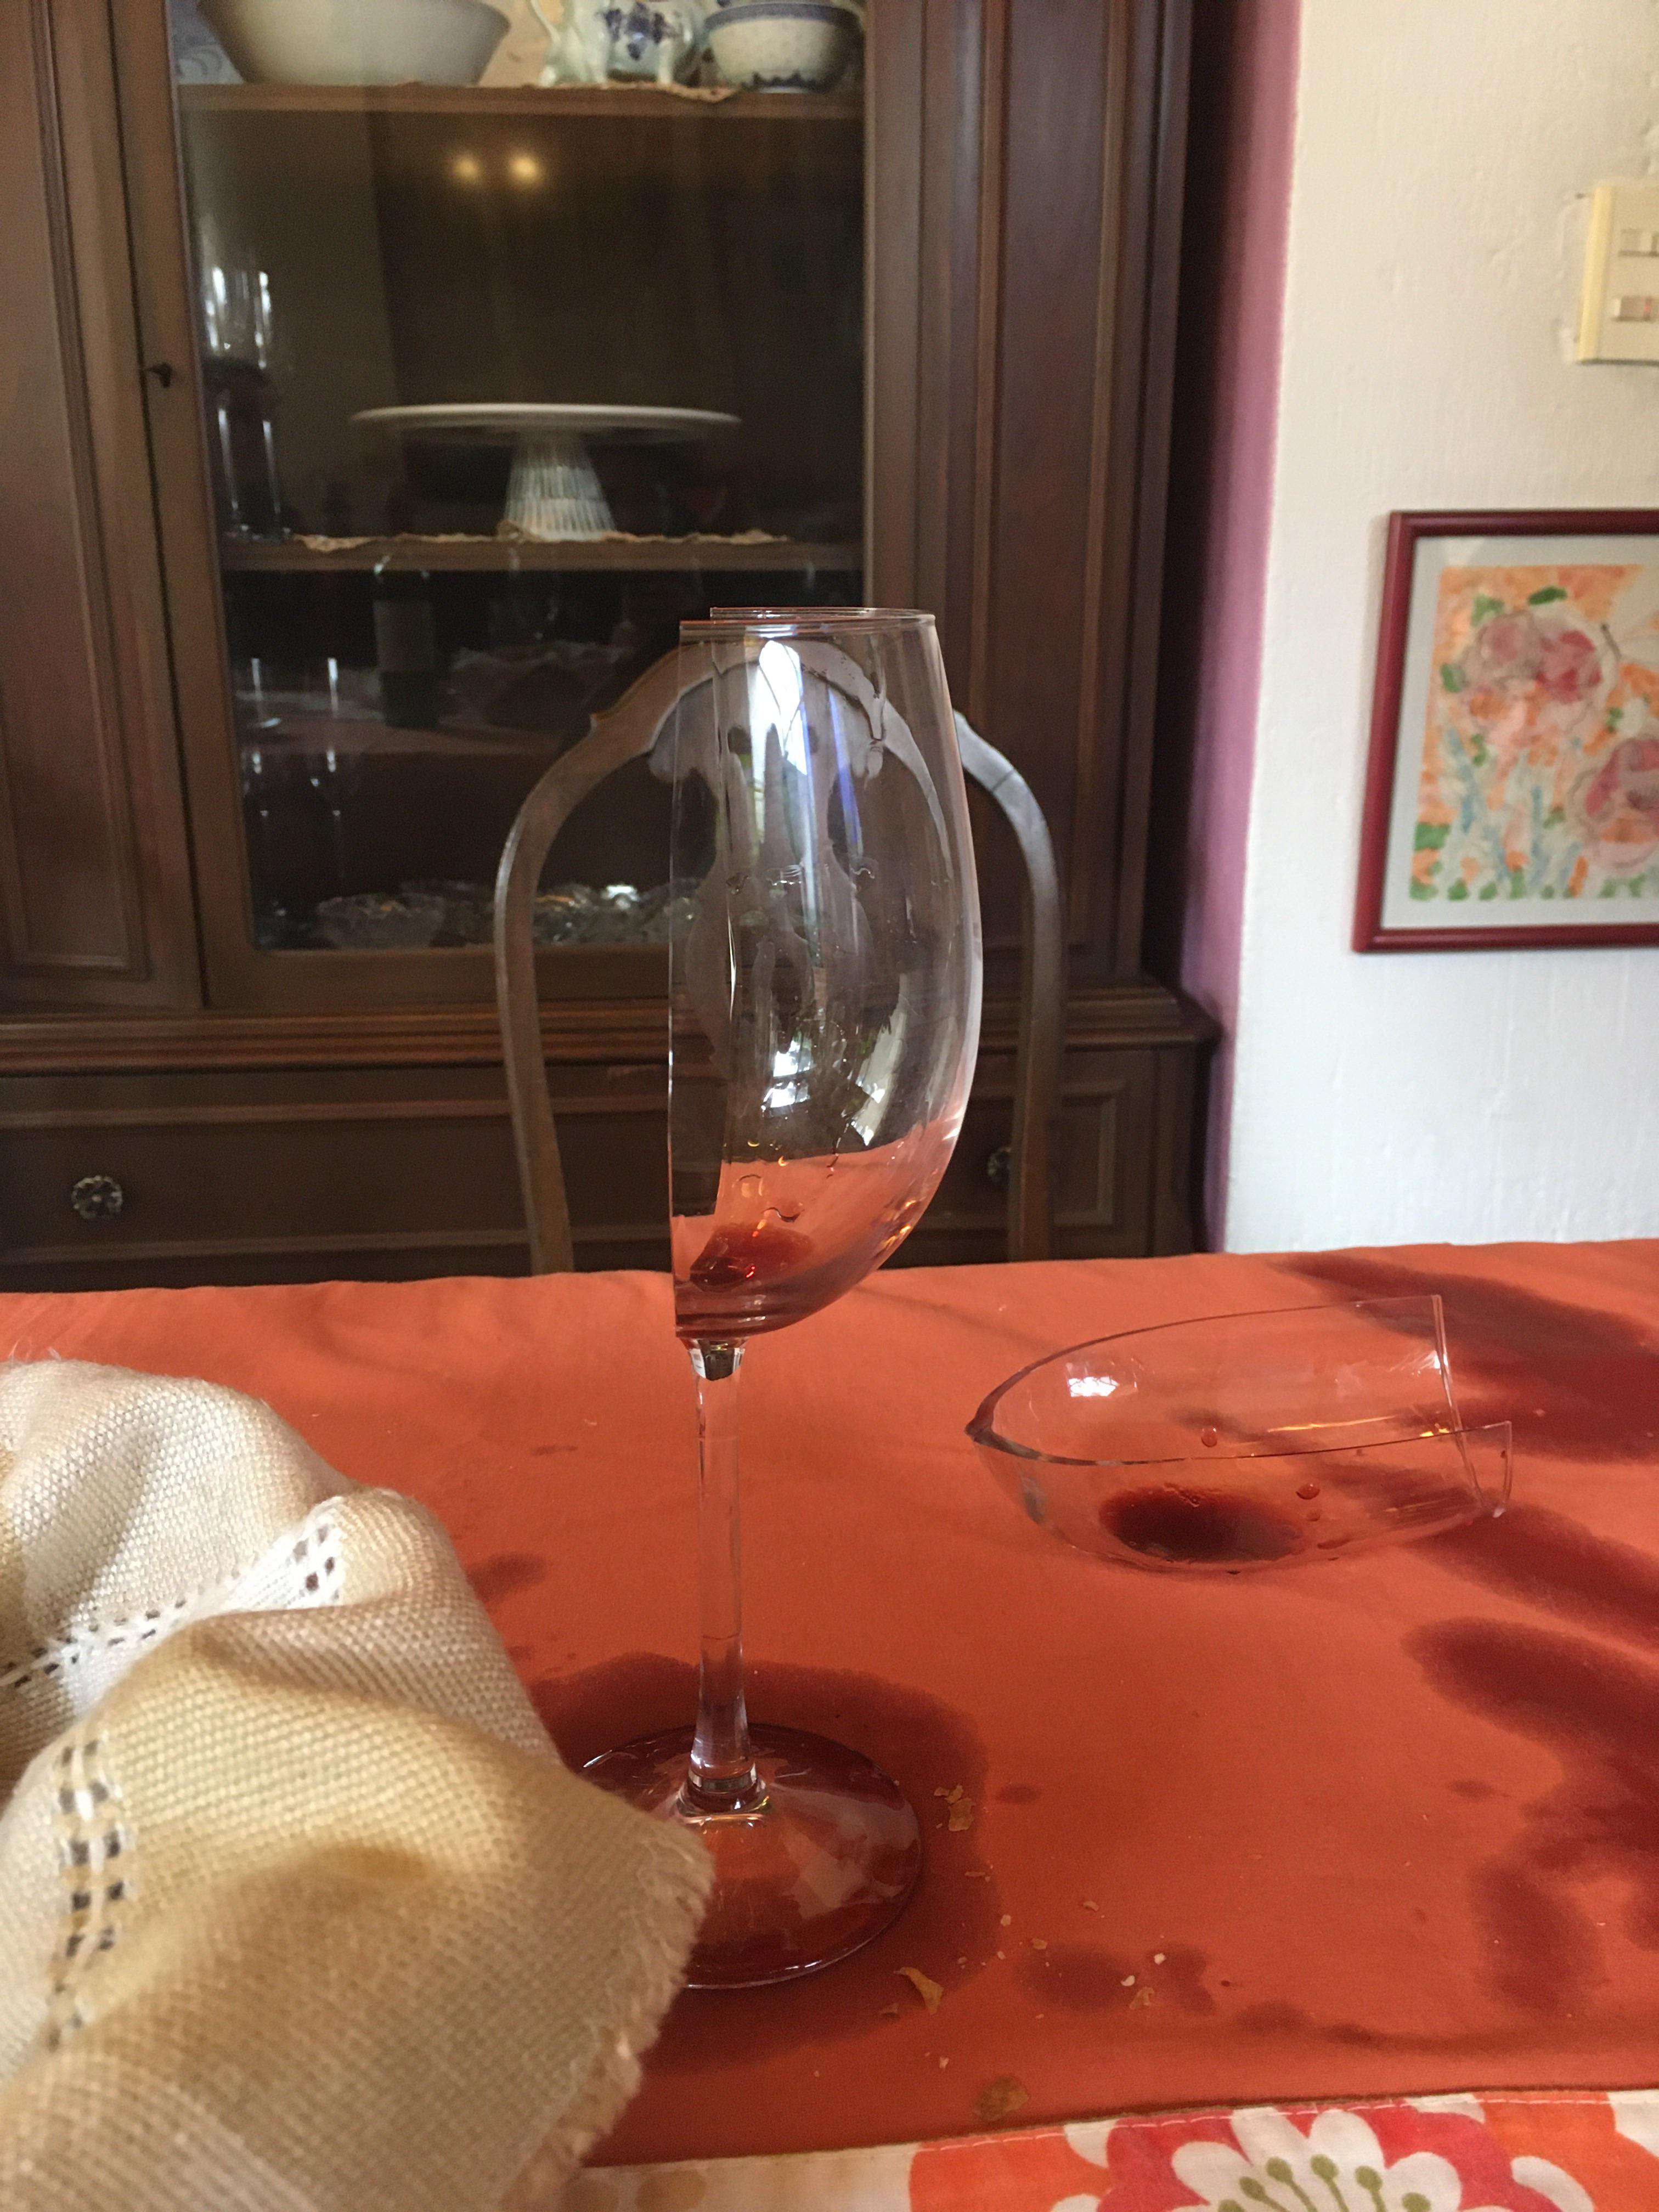 image showing My aunt spilled the wine and the glass broke exactly in half